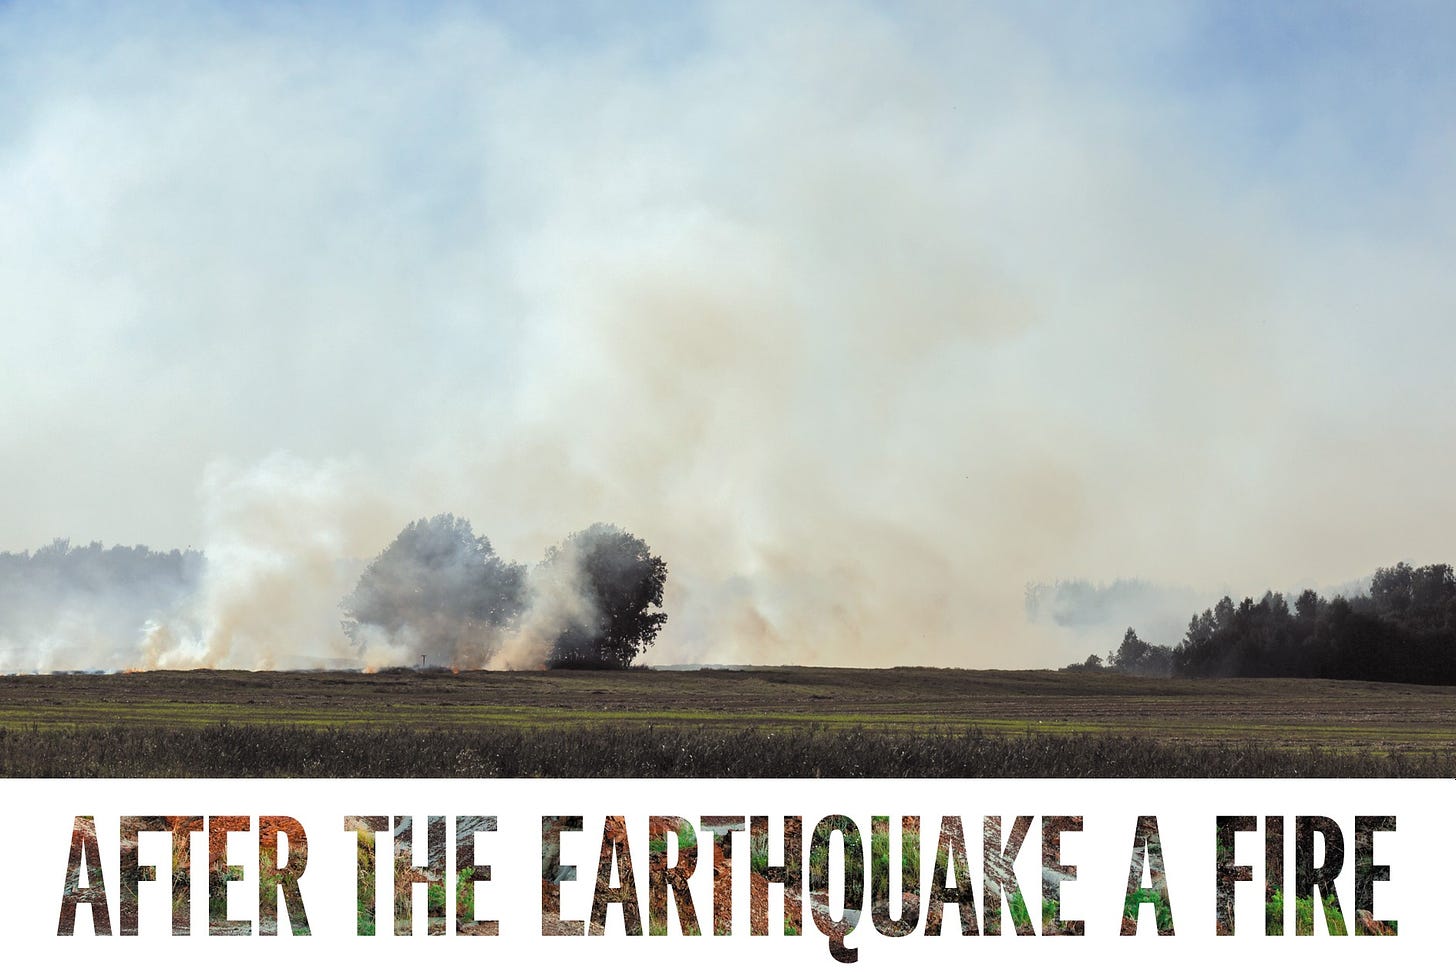 A photograph of smoke rising into a blue sky from among distant trees, beyond an expanse of grass and scrub, appears above the title "After the Earthquake a Fire."